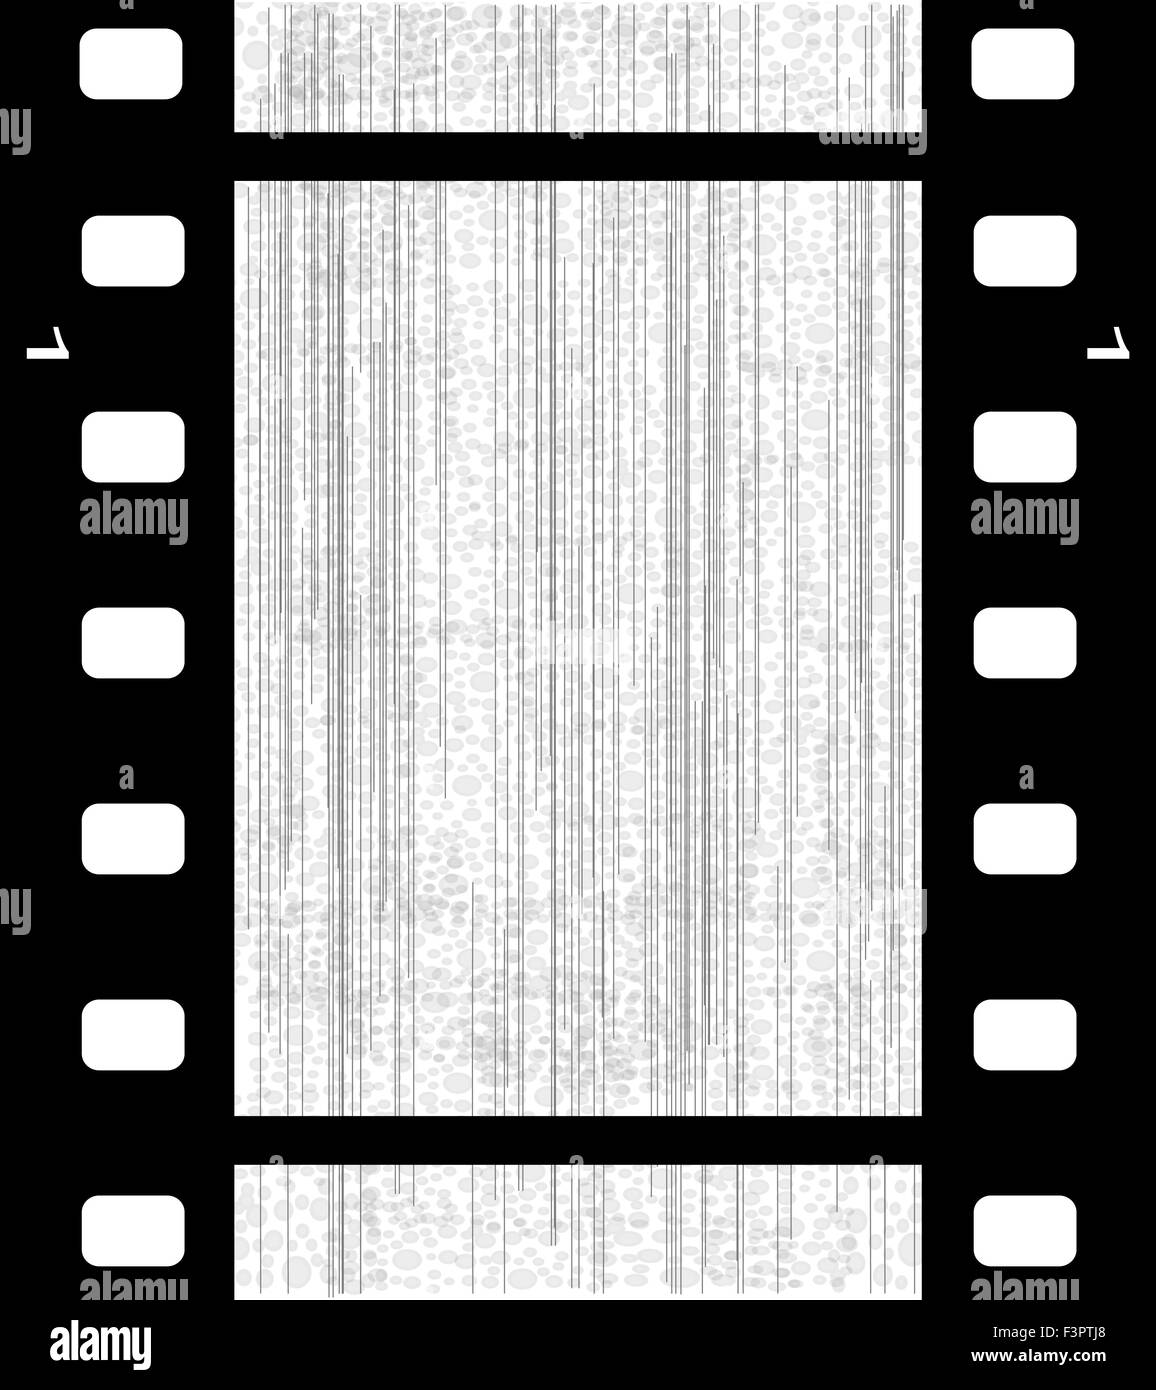 Celluloid film strip Black and White Stock Photos & Images - Alamy